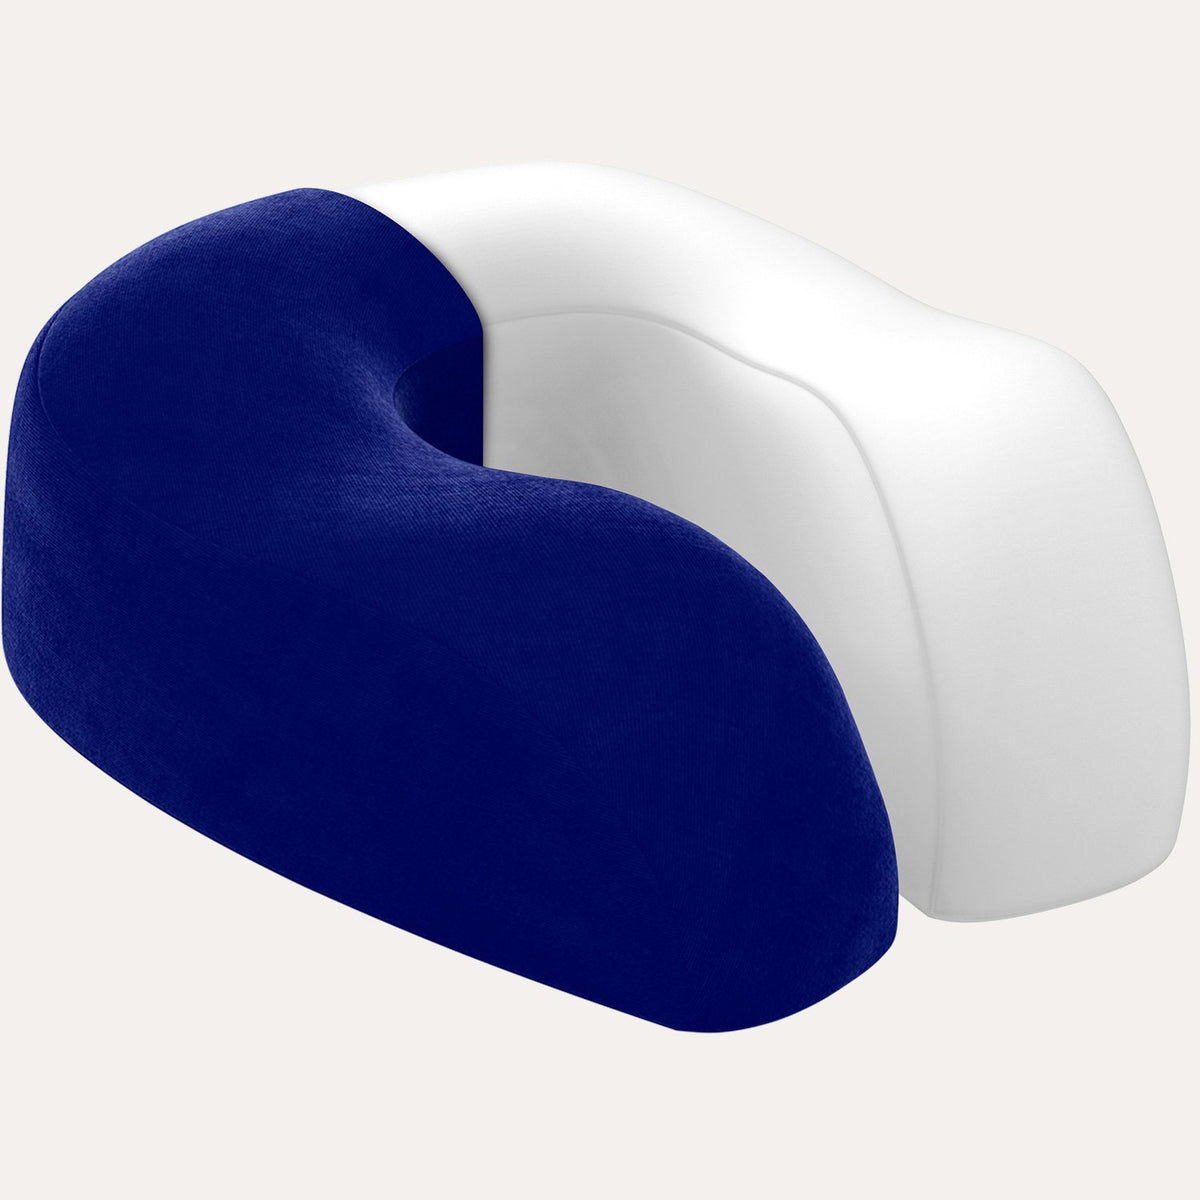 How to Use Travel Neck Pillow: Great on Airplanes – Everlasting Comfort